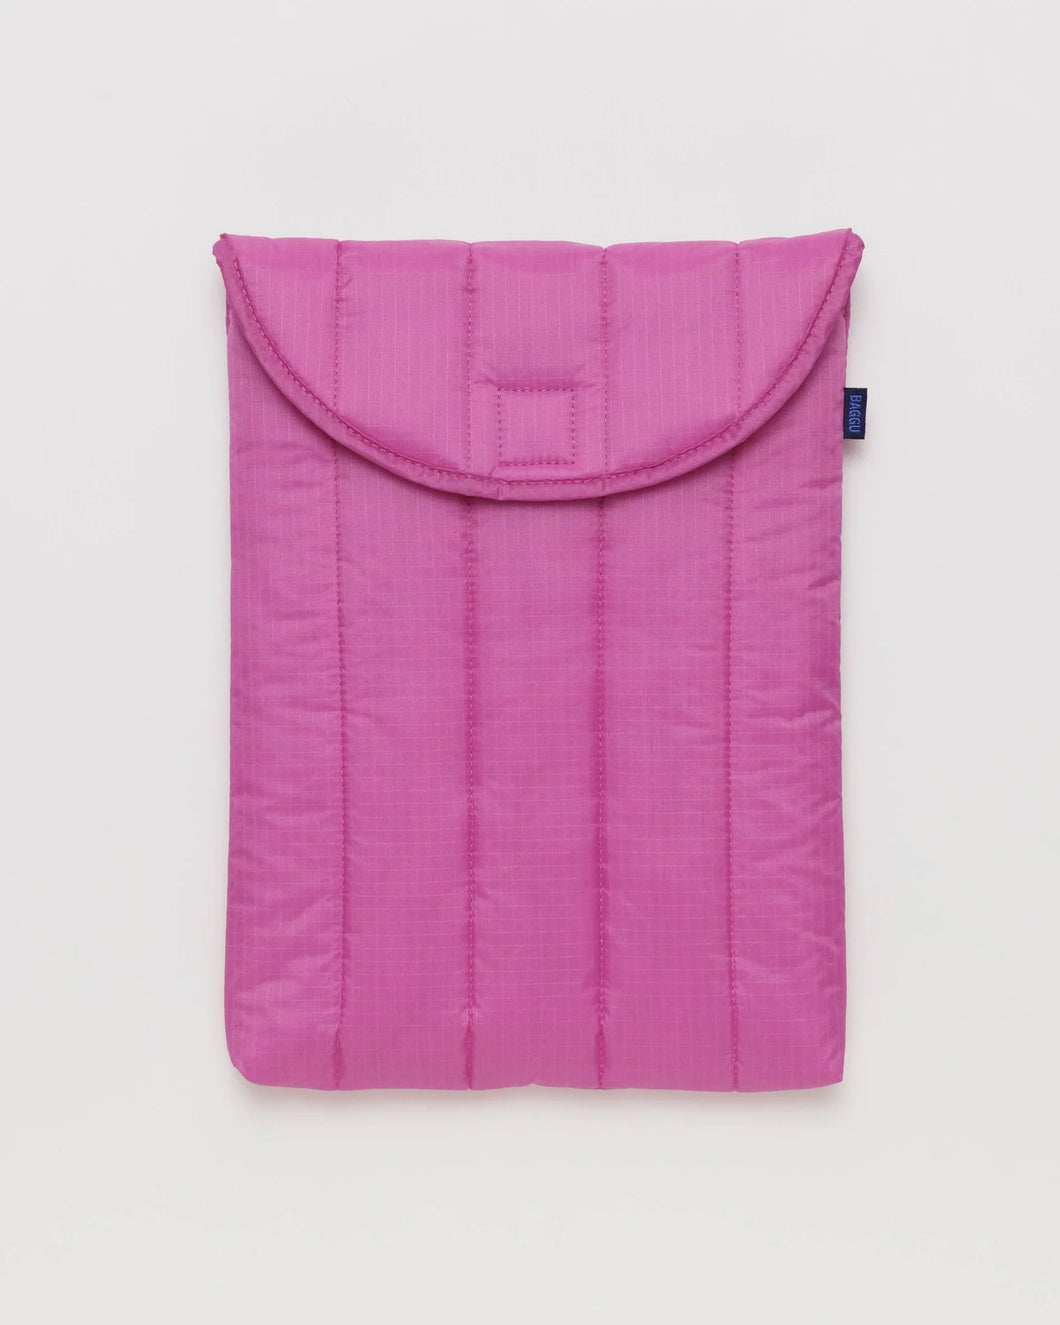 PUFFY LAPTOP SLEEVE -  EXTRA PINK 13